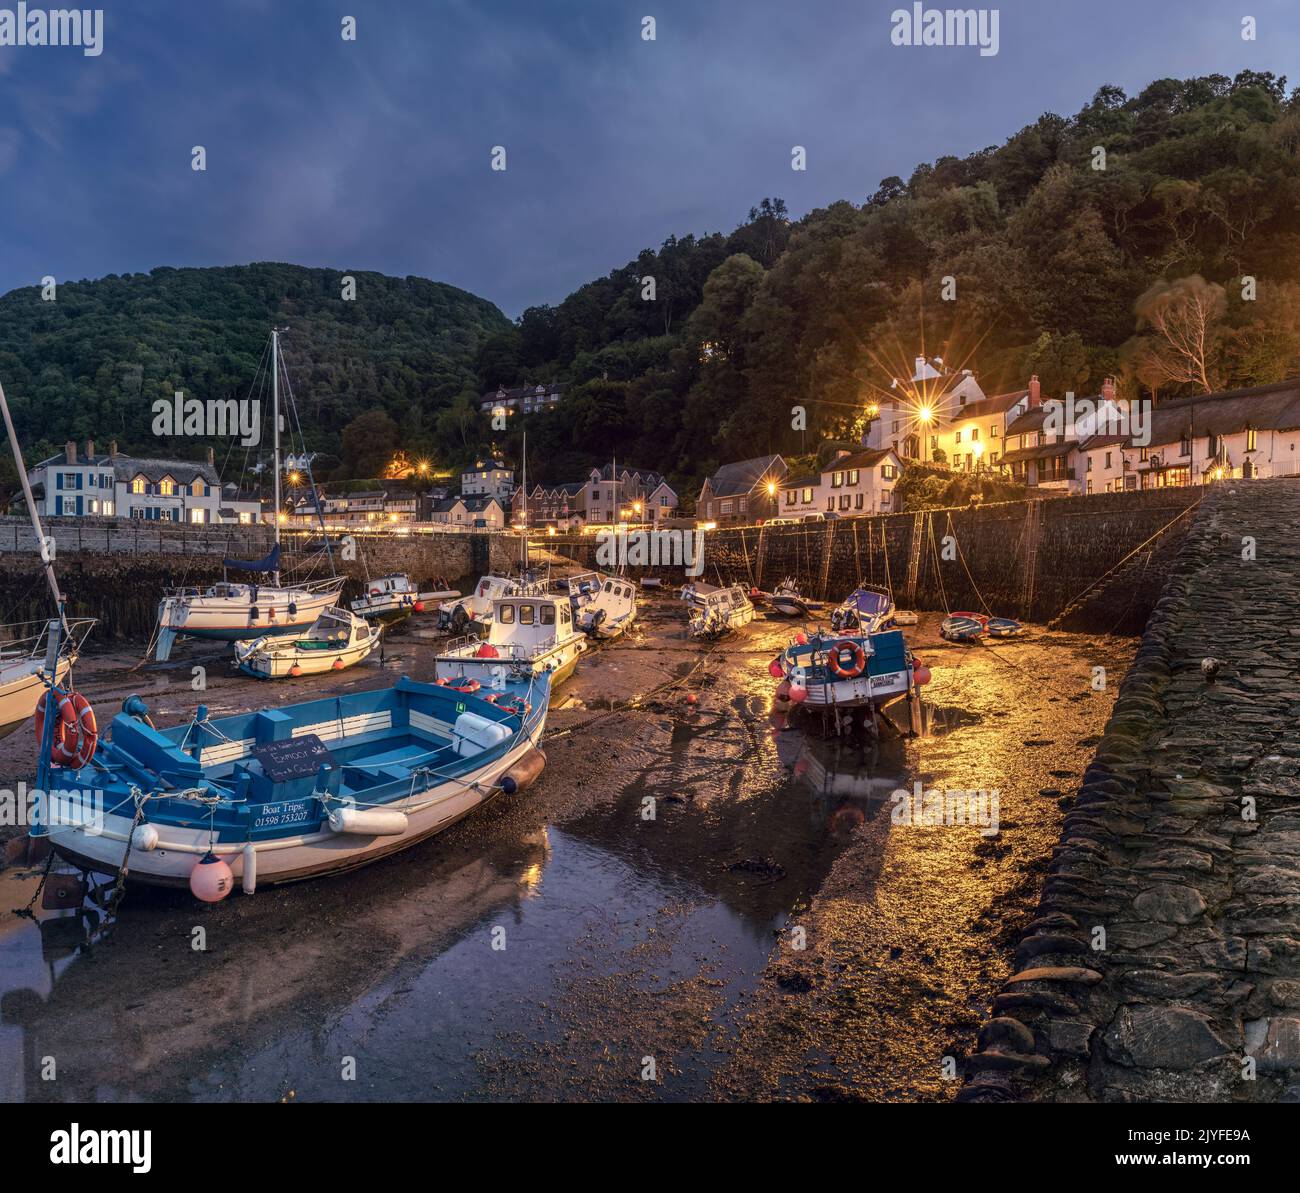 As daylight fades, the lights come on around the small picturesque harbour at Lynmouth on the north coast of Devon. Lynmouth sits at the confluence of Stock Photo